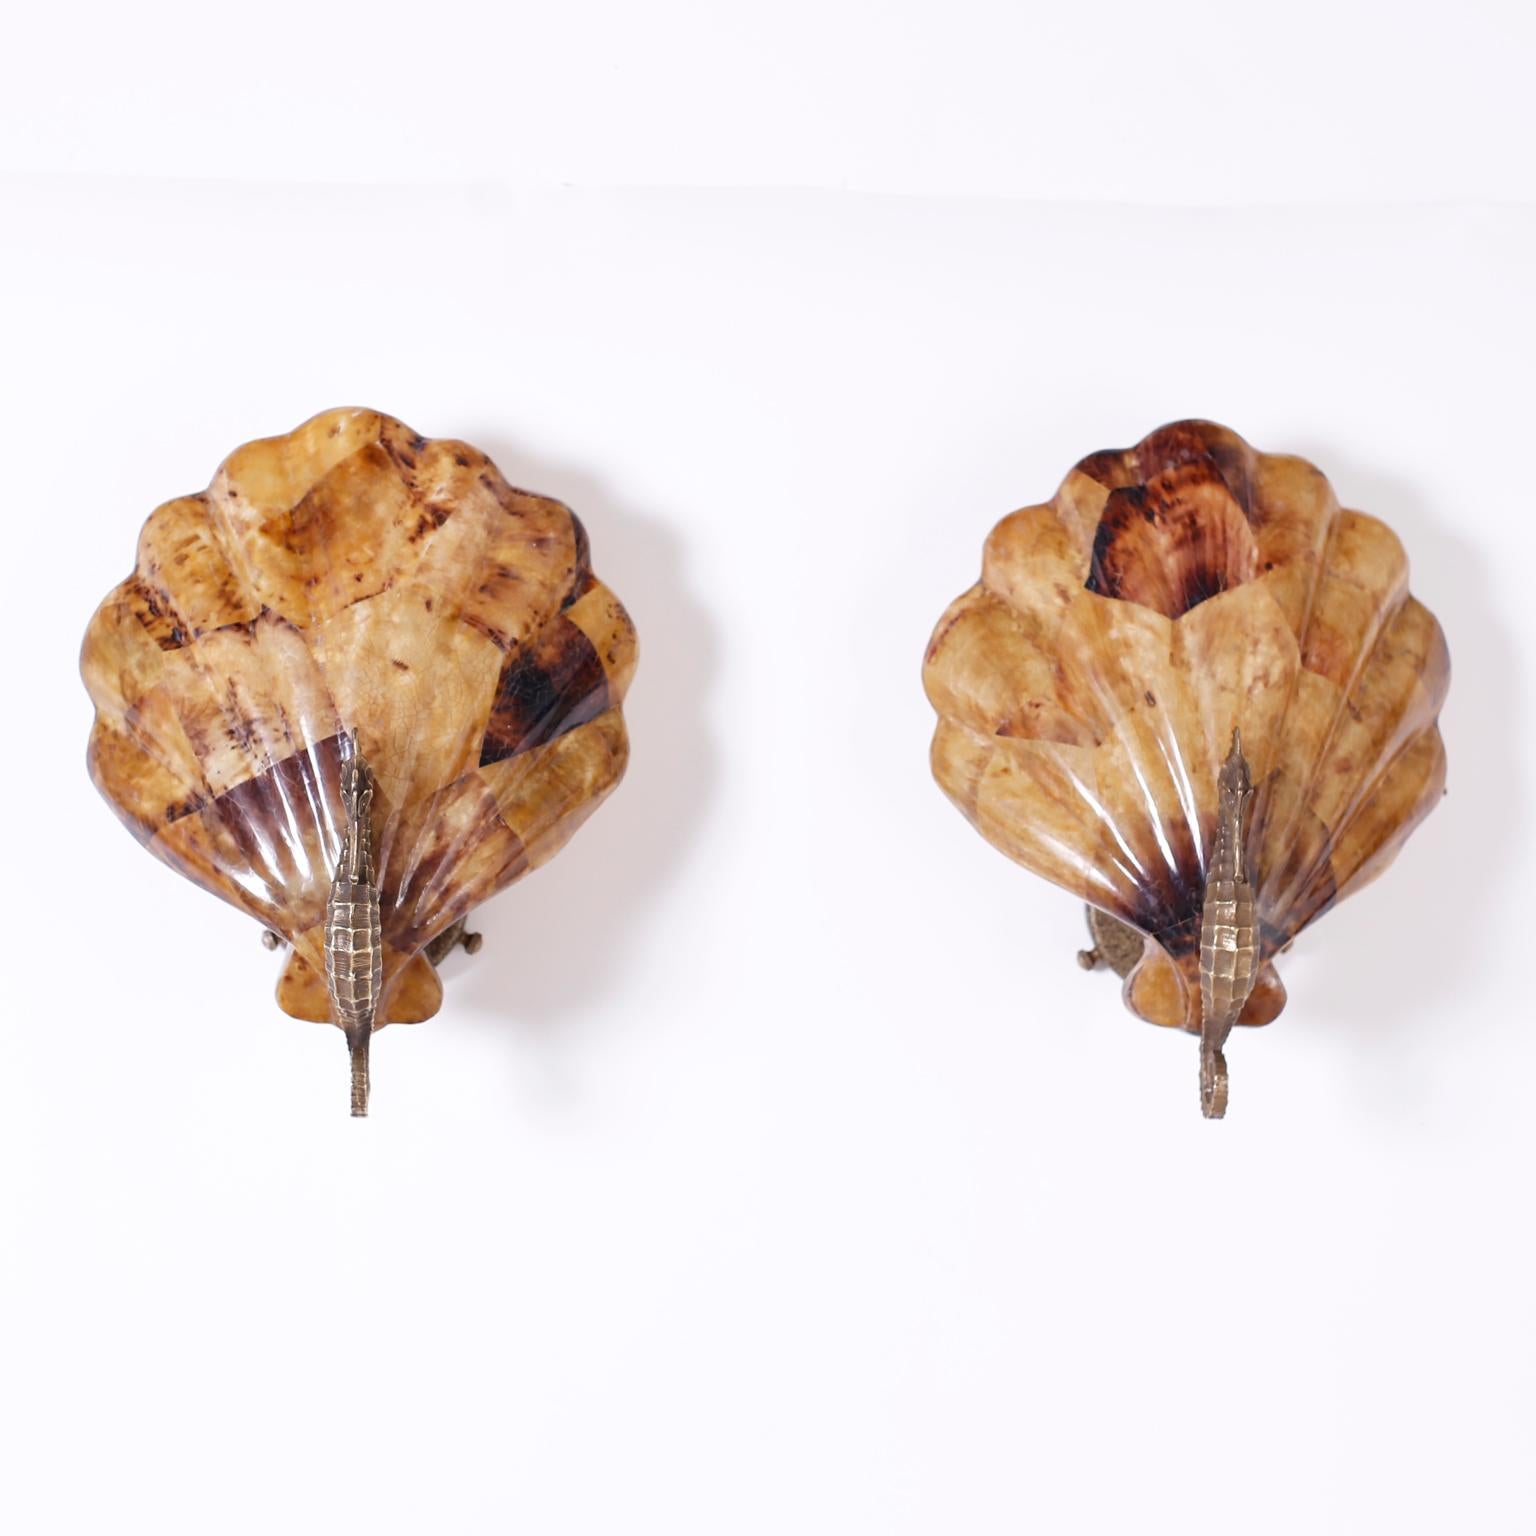 Pair of wall sconces with cast brass seahorses in front of seashell form shades crafted in penshell by Maitland Smith.